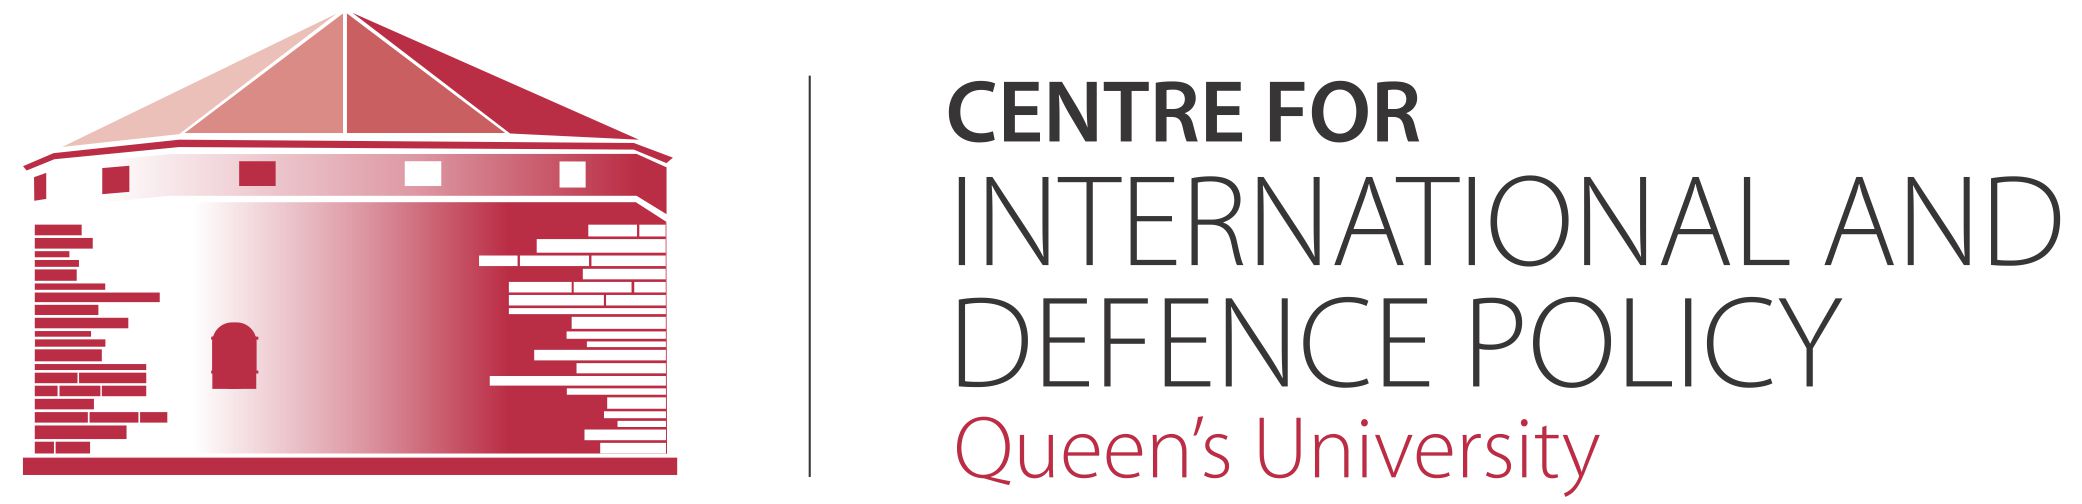 Centre for International and Defence Policy (CIDP)